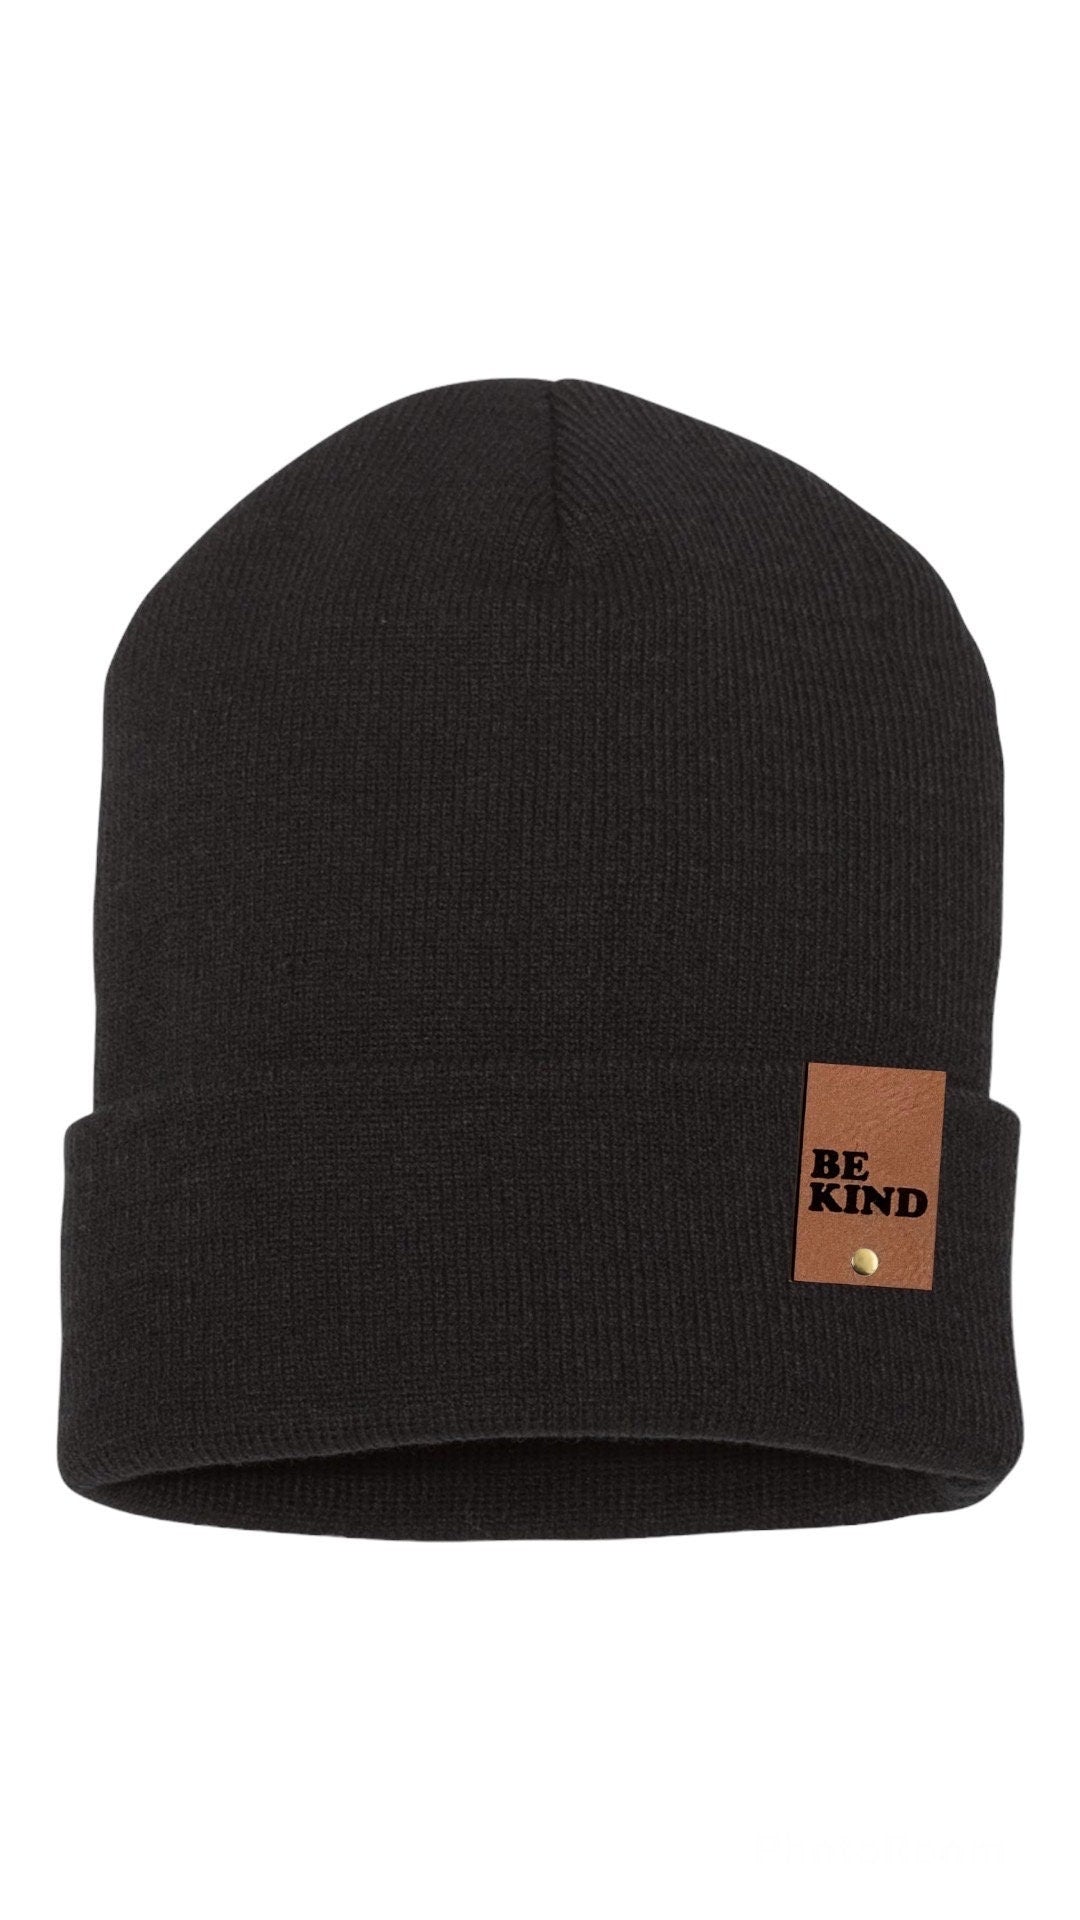 BE KIND Sustainable Custom Color Patch Beanie - eco friendly Vegan Leather laser engraved winter hat rivet tag hat recycled